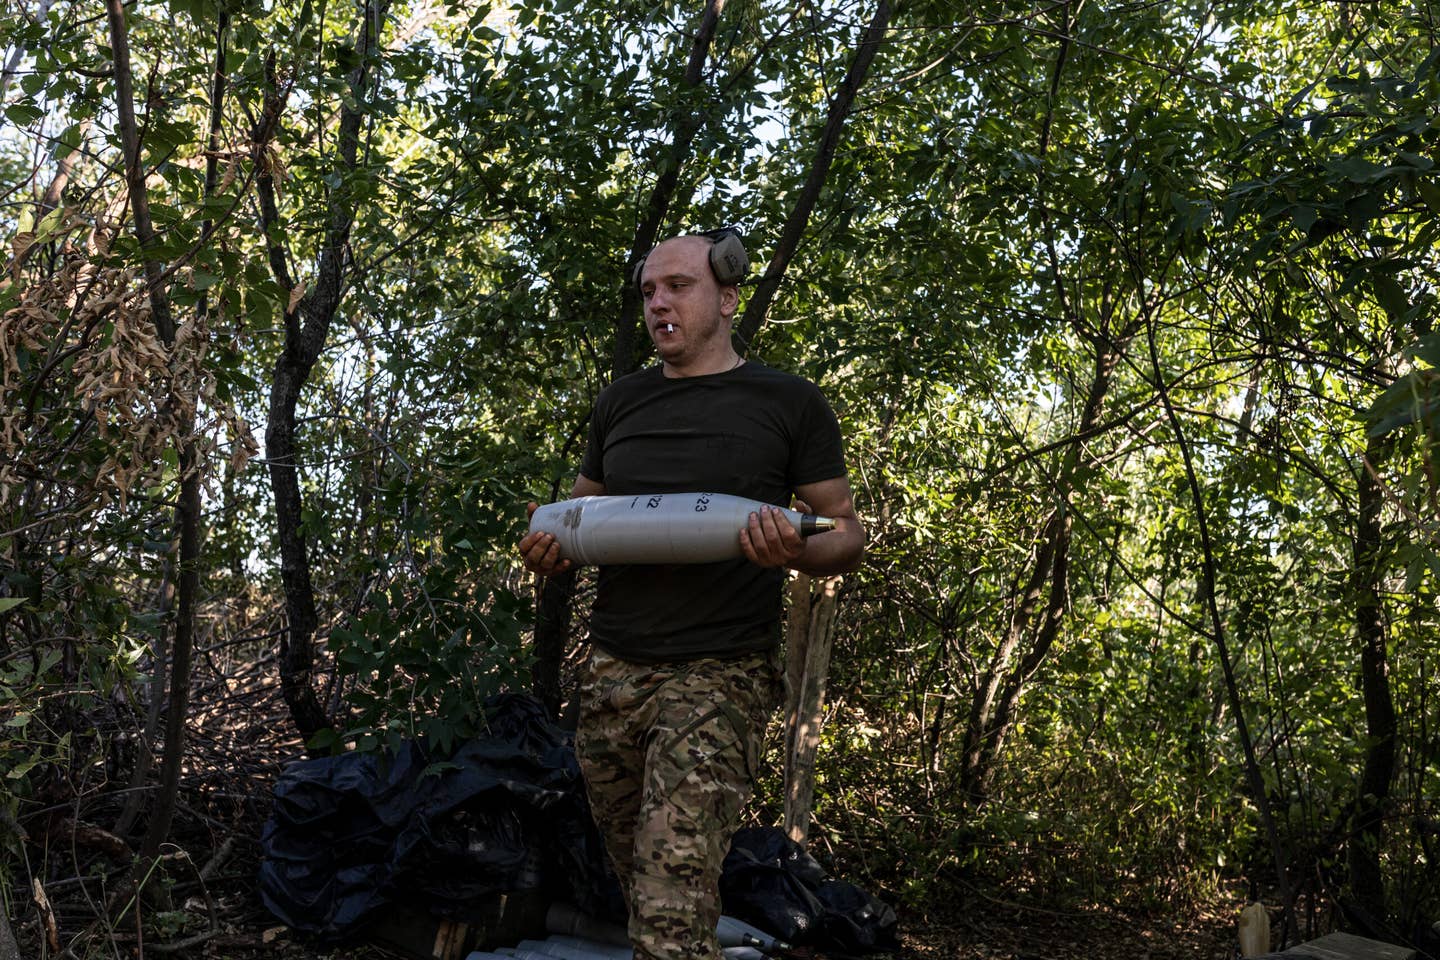 Ukrainian soldier of the Aidar battalion, carries a shell for D-30 artillery on the frontline in the direction of Bakhmut as Russia-Ukraine war continues in Donetsk Oblast, Ukraine on August 14, 2023. (Photo by Diego Herrera Carcedo/Anadolu Agency via Getty Images)